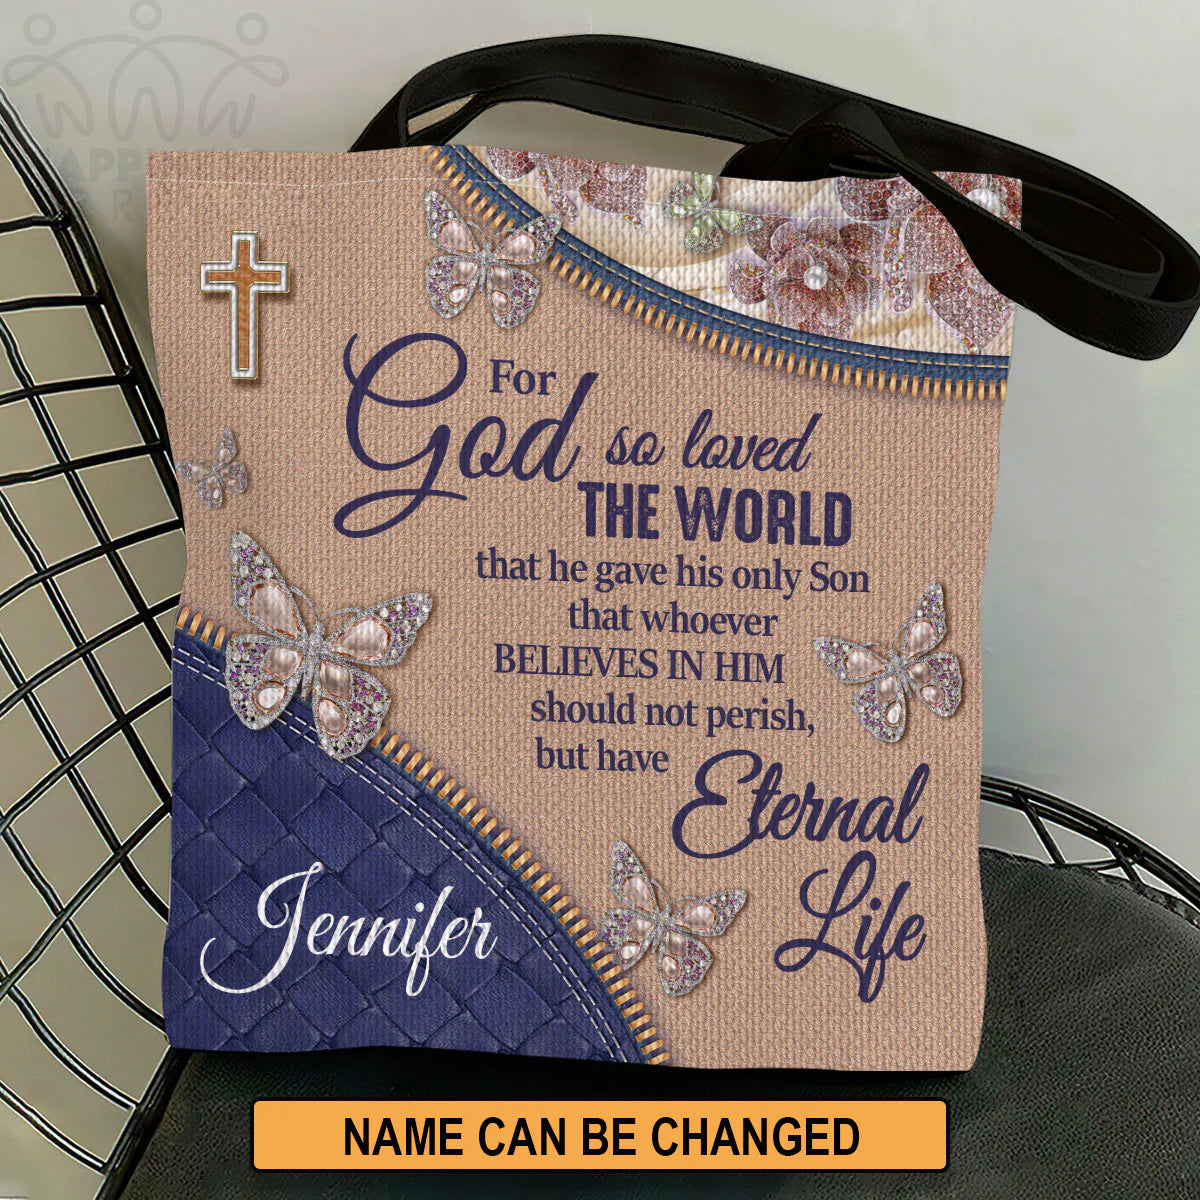 Christianart Handbag, Personalized Hand Bag, For God So Loved The World, Personalized Gifts, Gifts for Women. - Christian Art Bag